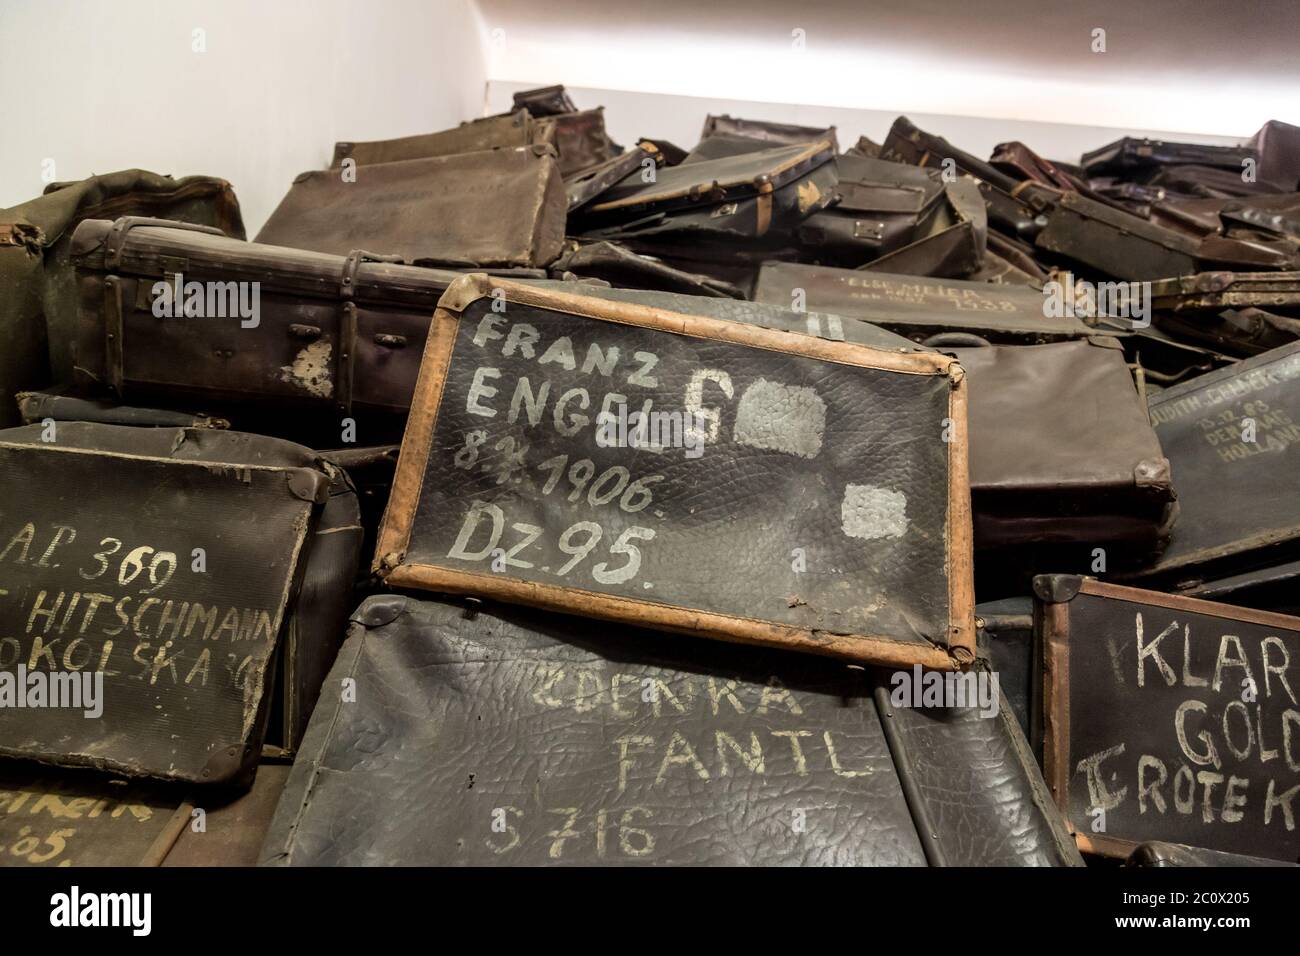 Bags of victims in Auschwitz Stock Photo - Alamy